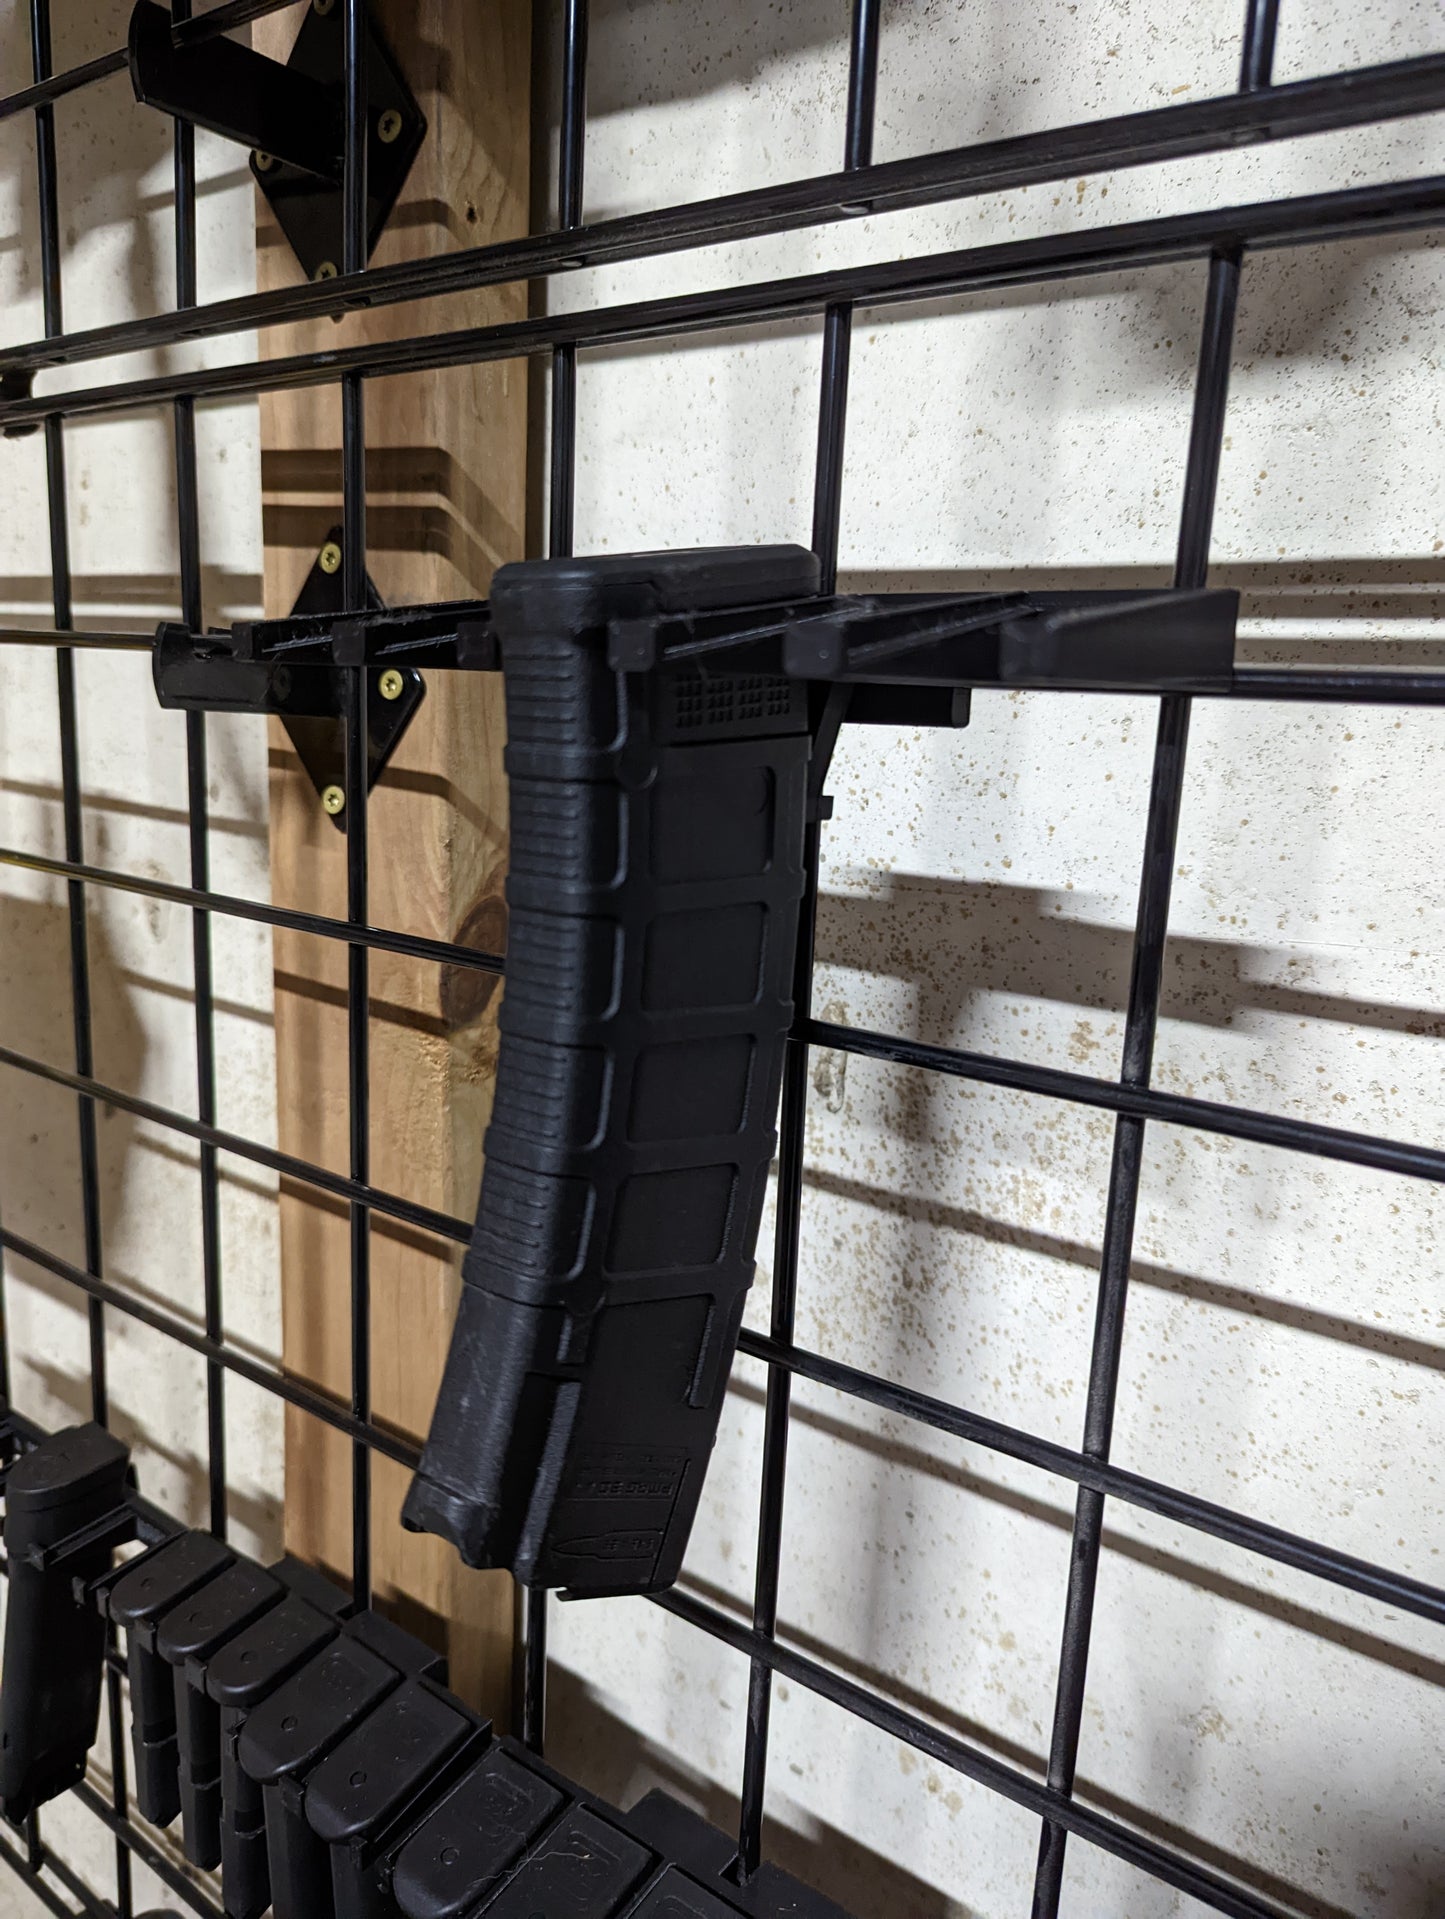 Mount for 545 AK Pmag Mags - Gridwall | Magazine Holder Storage Rack